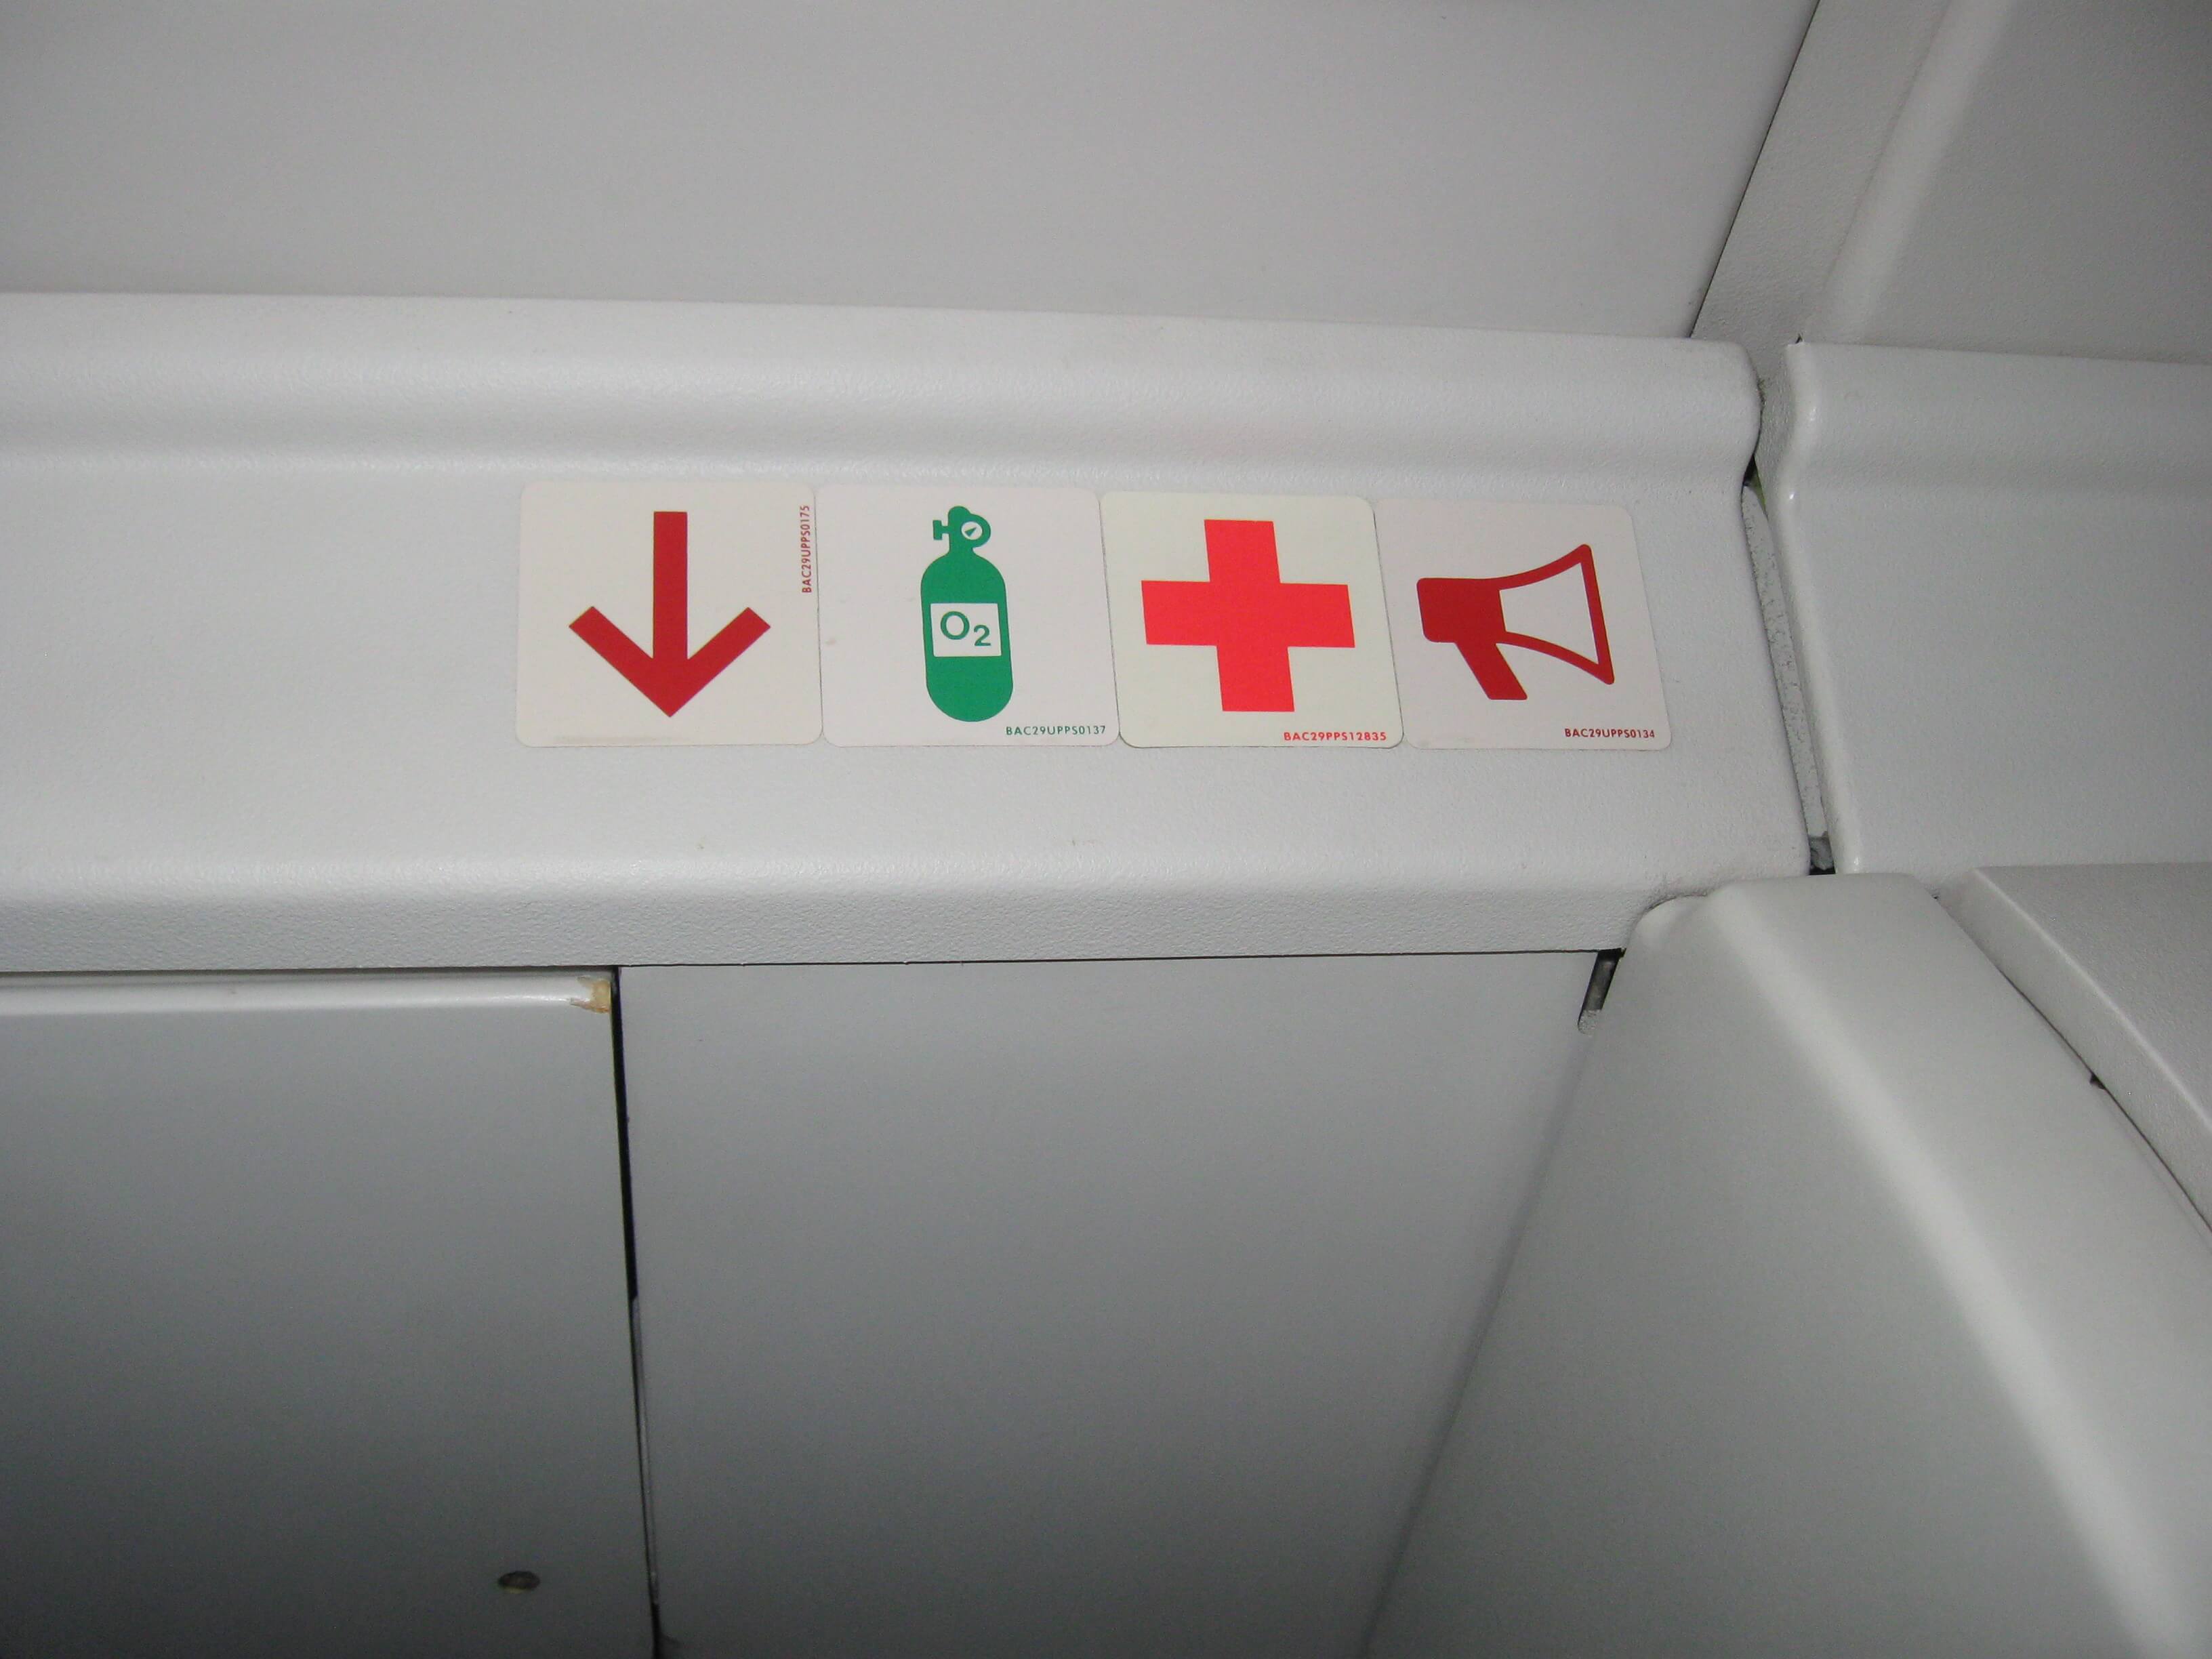 Typical Emergency Equipment Layout